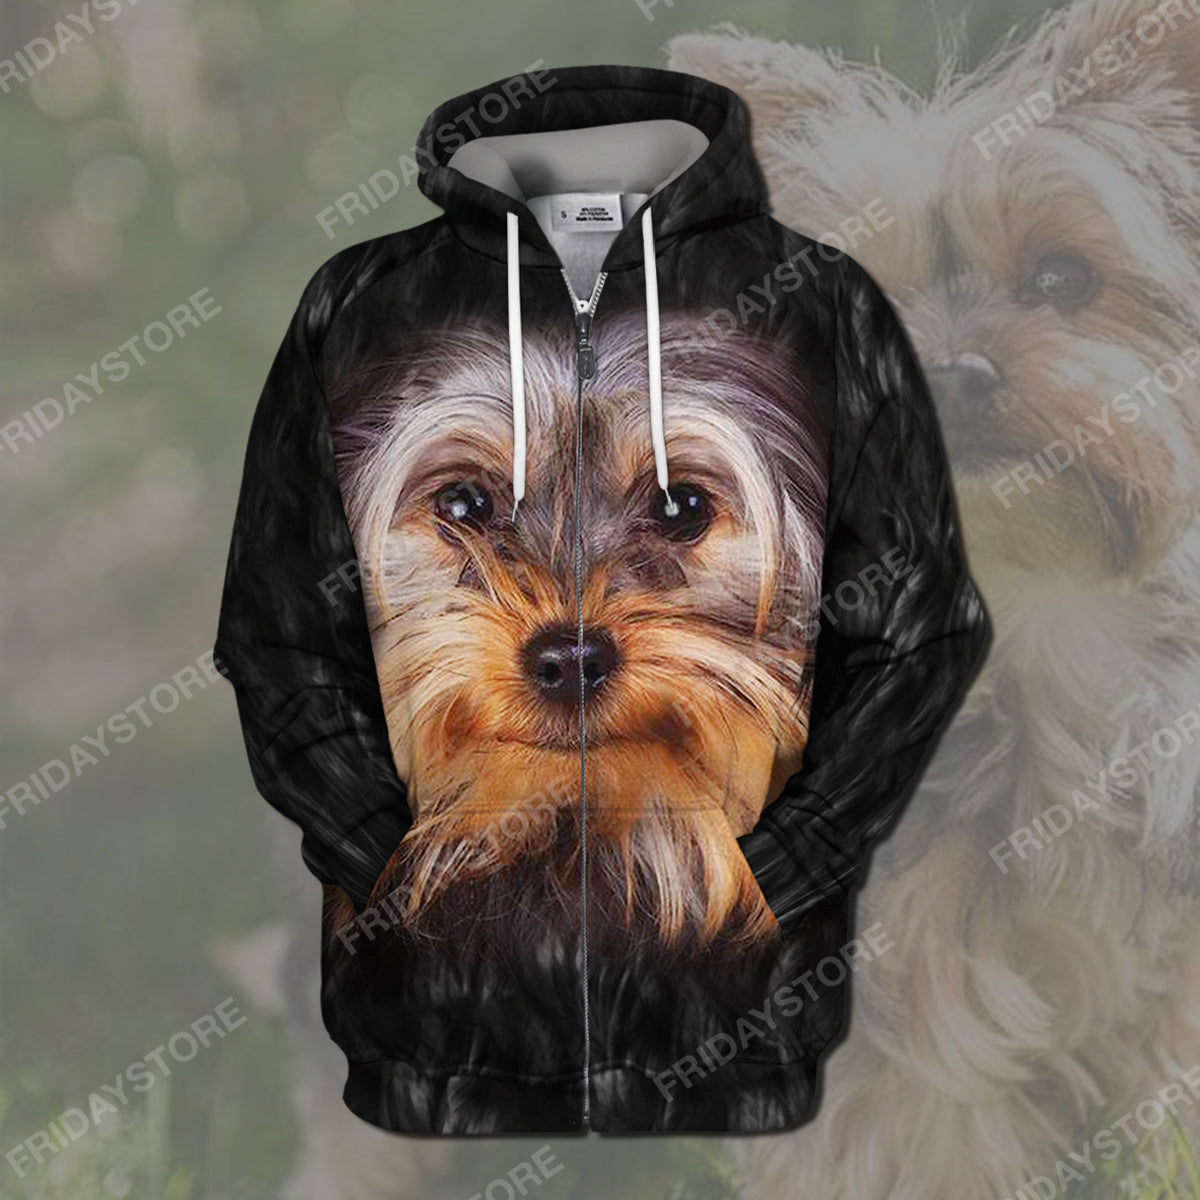 Unifinz Dog Hoodie Yorkshire Terrier Black Hoodie Yorkshire Terrier Dog Graphic Shirt Cute Dog Shirt Sweater Tank For Dog Lovers 2026